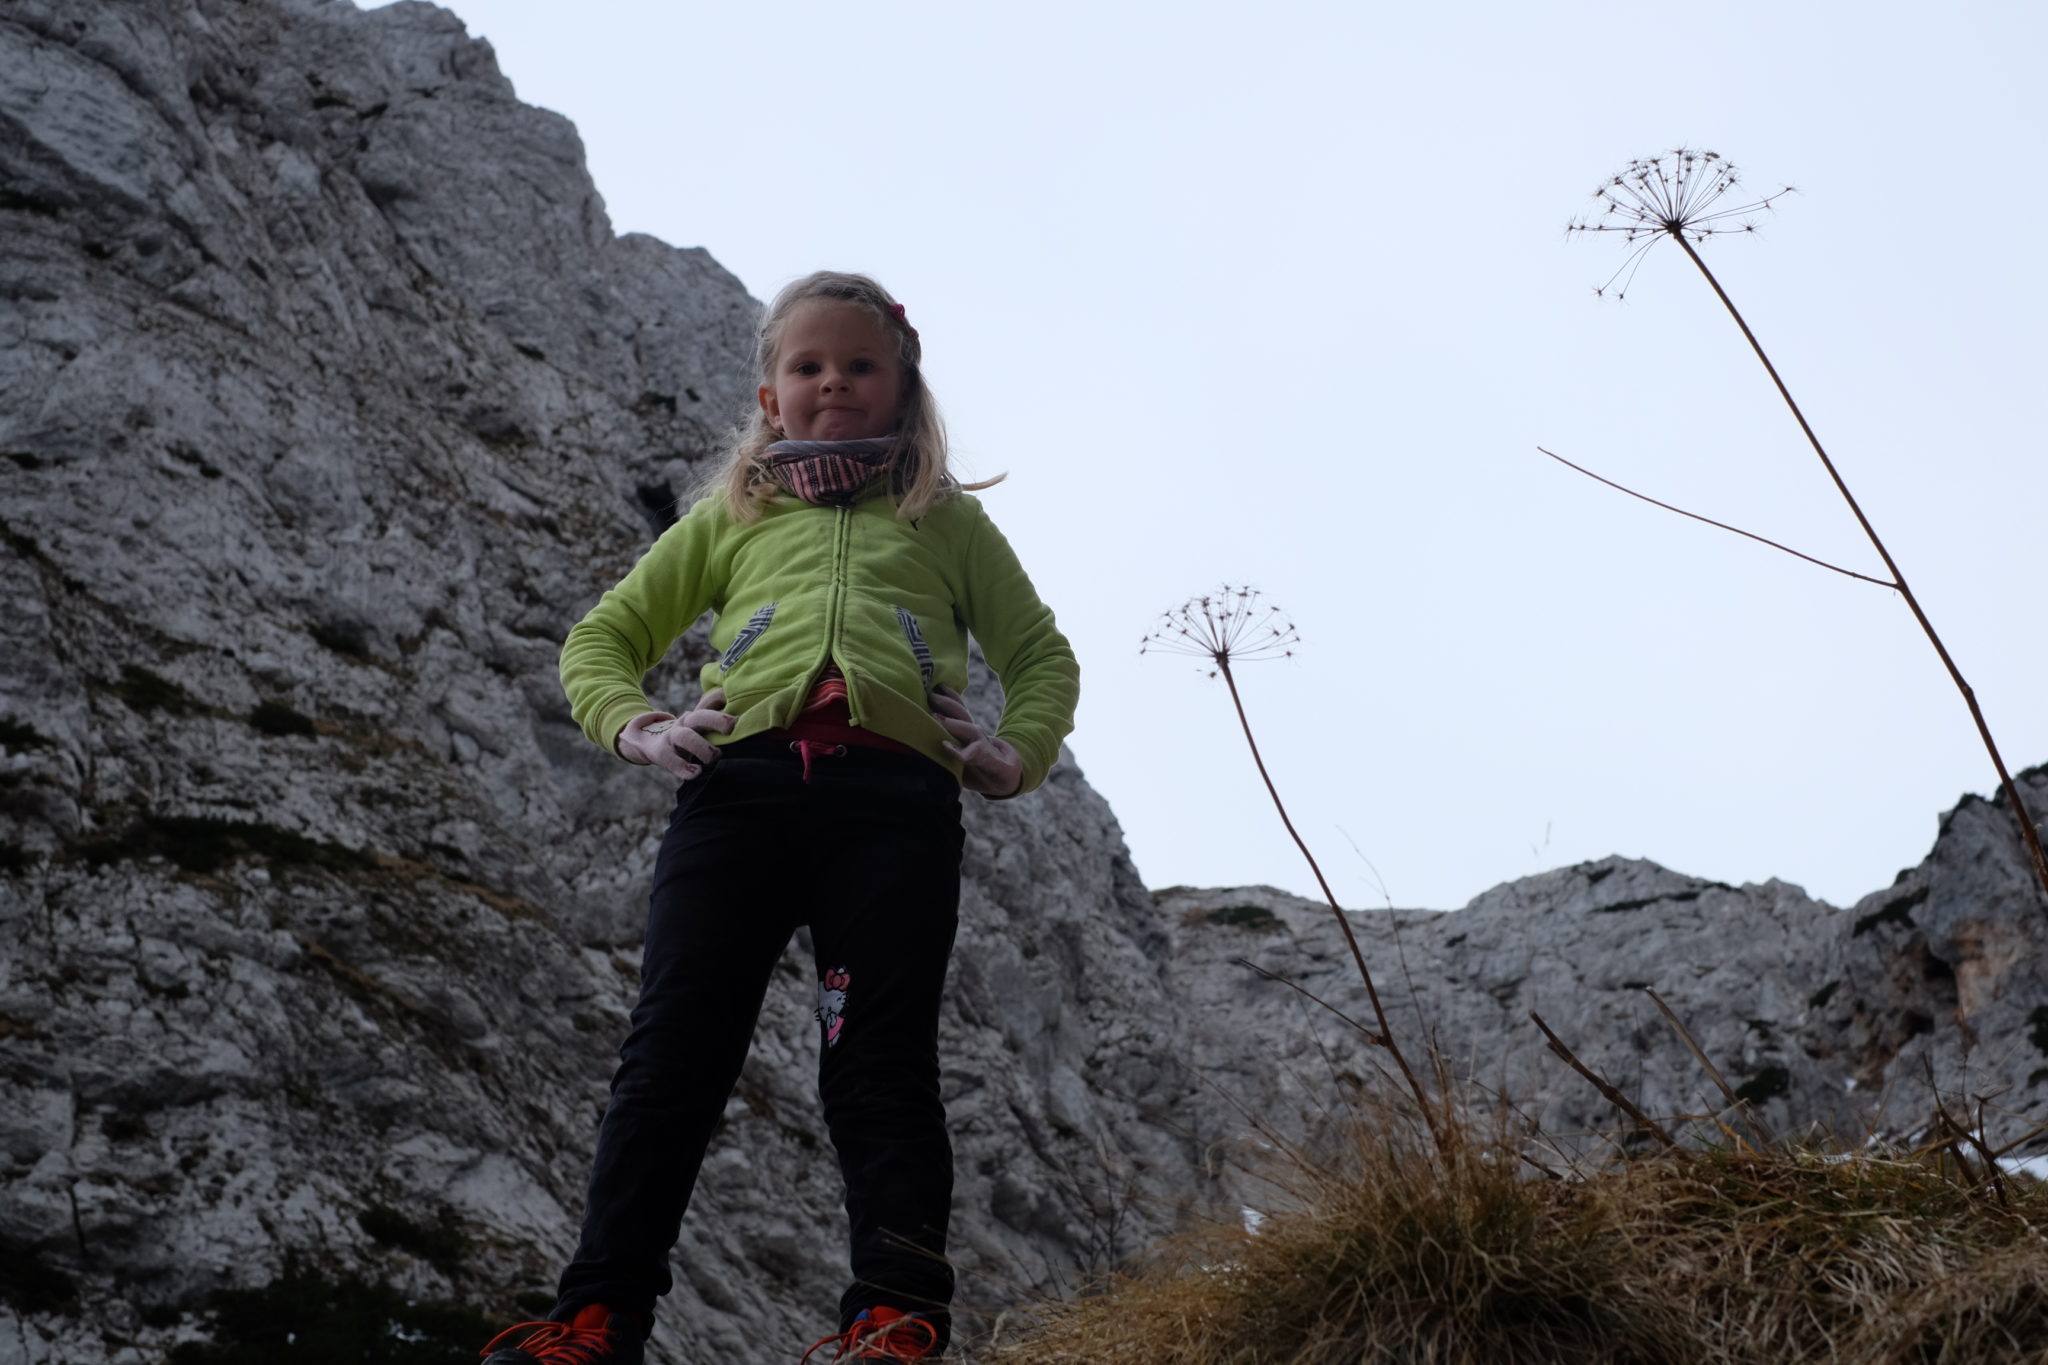 My daughter’s first experience in the high mountains at the age of 6, making 2,930 Ft (893 m) elevation gain to a mountain pass just below the highest mountain of the Kamnik-Savinja Alps in Slovenia. Photo by: Exploring Slovenia.